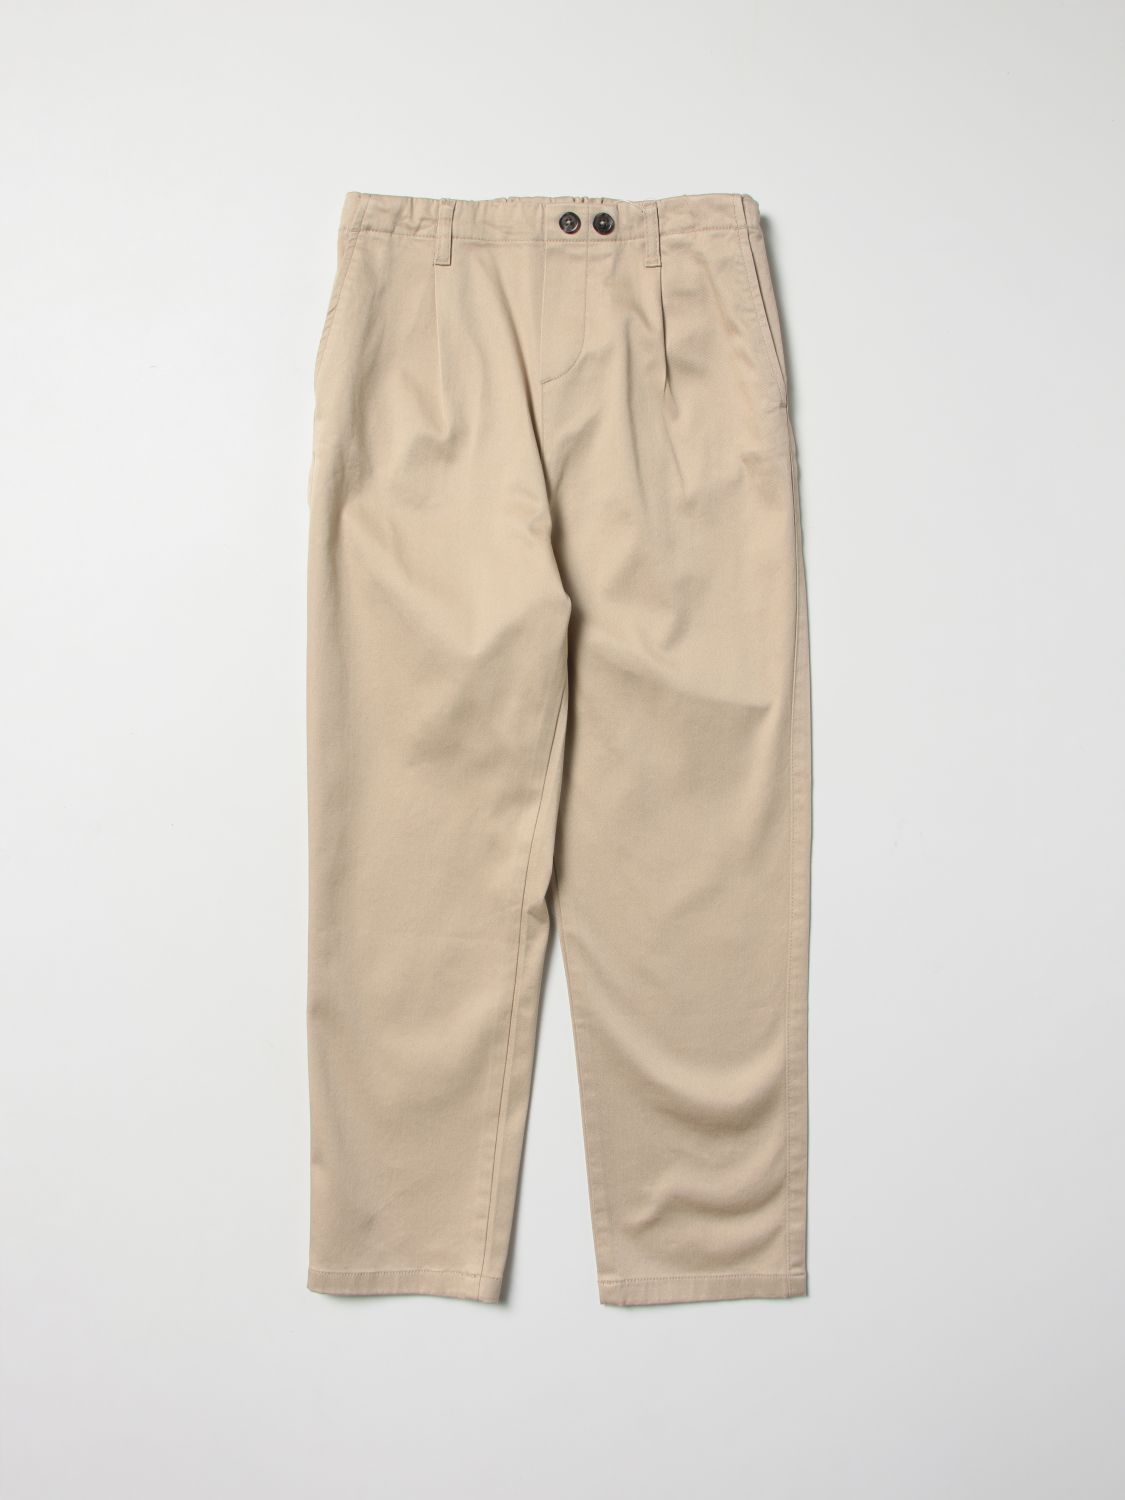 Douuod Outlet: pants for girls - Beige | Douuod pants 2Q6820Z0224 ...